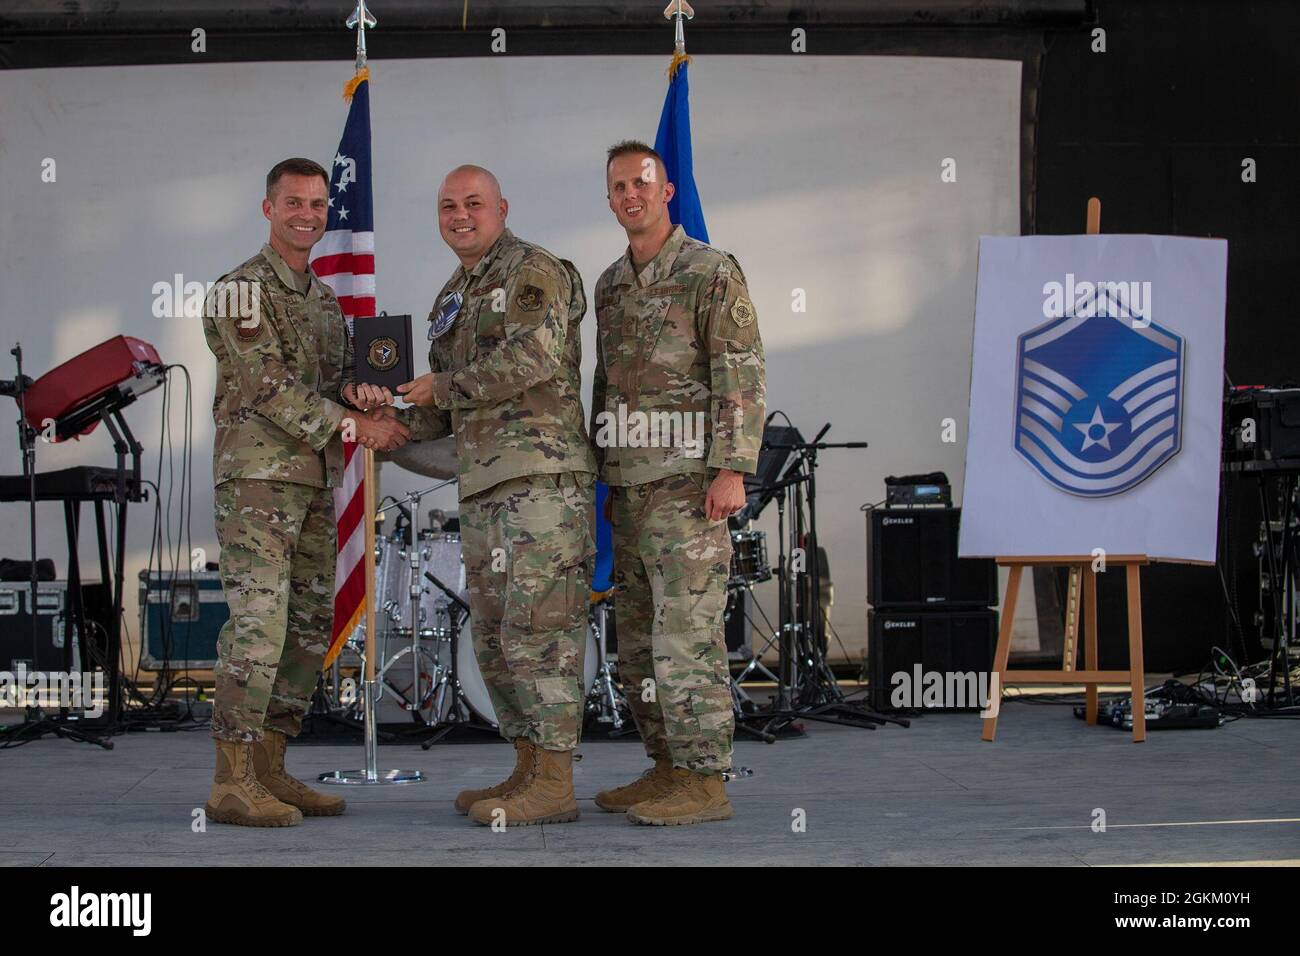 U.S. Air Force Brig. Gen. Larry R. Broadwell, 380th Air Expeditionary Wing commander (AEW), and Chief Master Sgt. Joshua J. Wiener, 380th AEW command chief, pose with Tech. Sgt. Brandon Peterson, 380th Expeditionary Maintenance Group, at Al Dhafra Air Base (ADAB), United Arab Emirates, May 21, 2021. Peterson is one of 19 team ADAB technical sergeants that were selected for promoted to master sergeant this year. Stock Photo